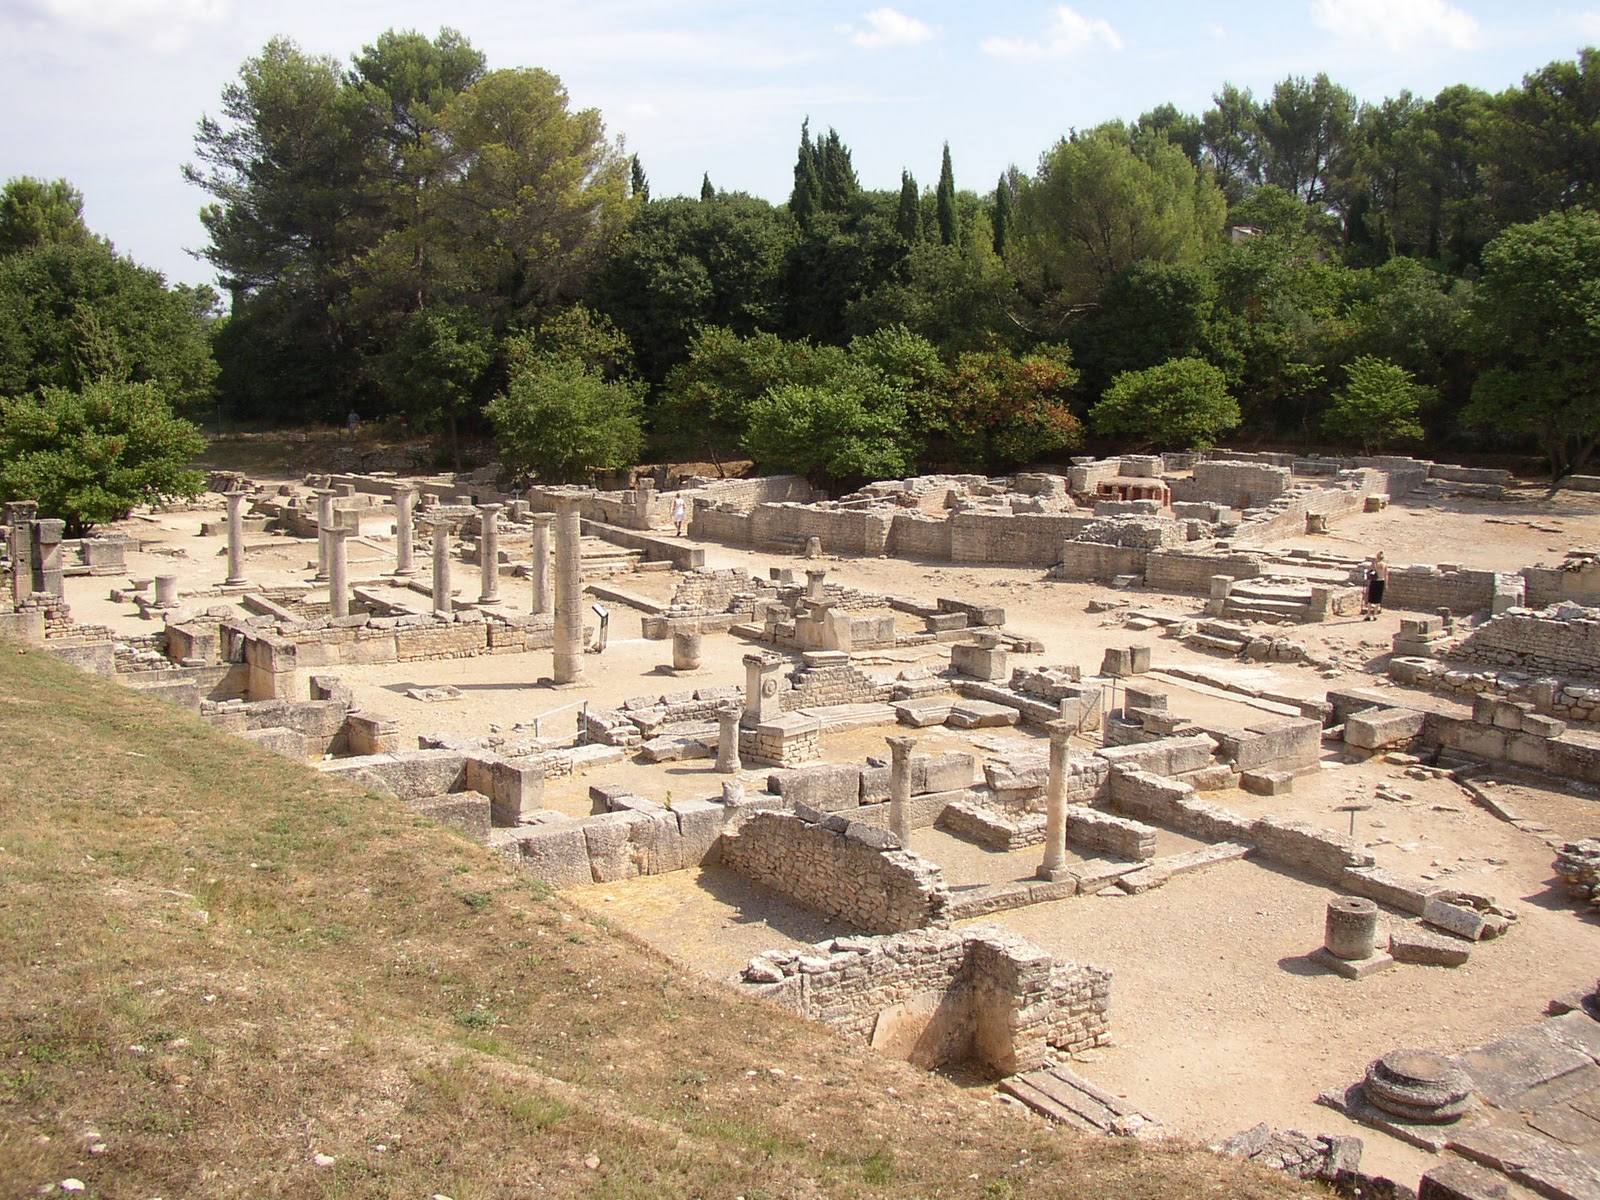 TRENTHAM TALES: St Remy de Provence and the Ancient Town of Glanum